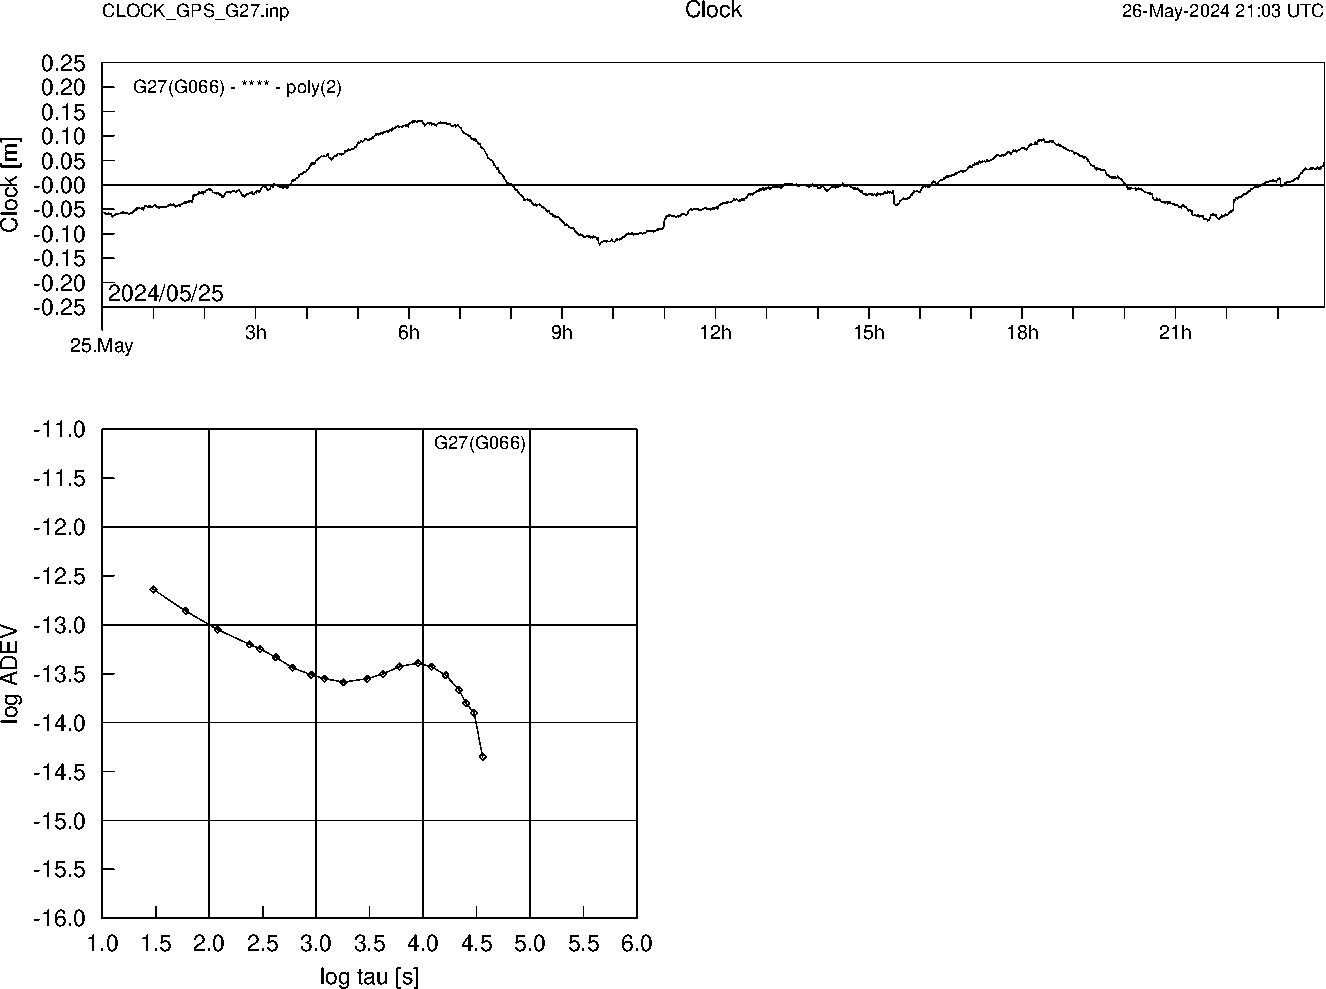 GPS G27 Clock Time Series and Allan Deviation